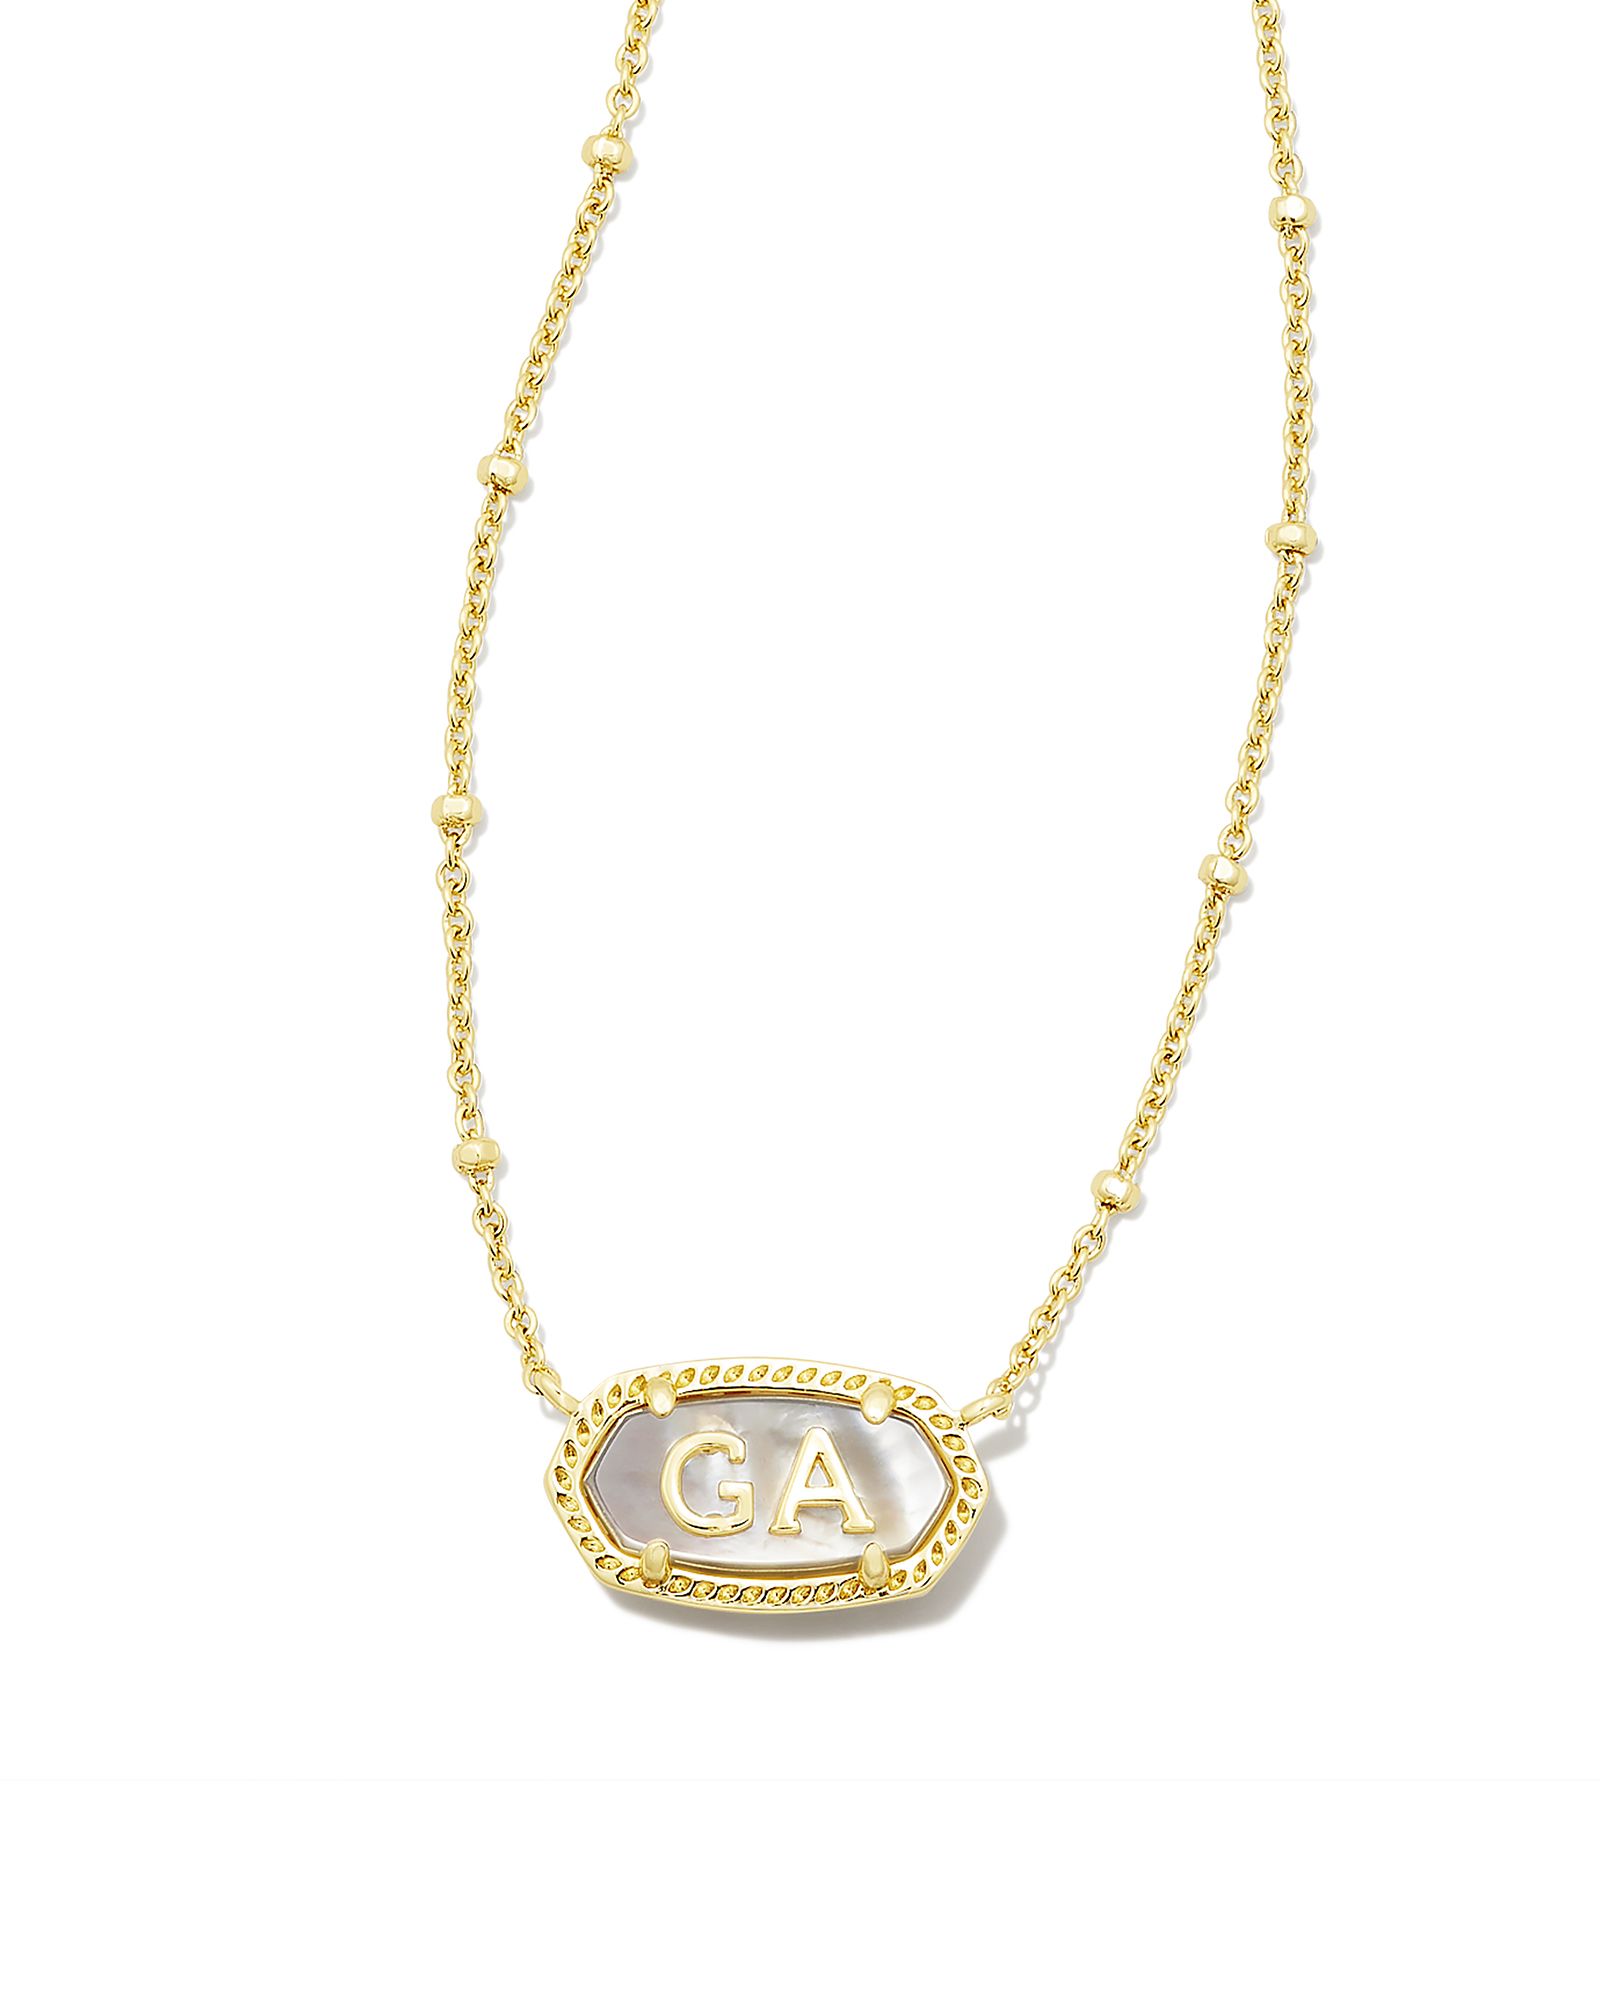 Elisa Gold Georgia Necklace in Ivory Mother-of-Pearl | Kendra Scott